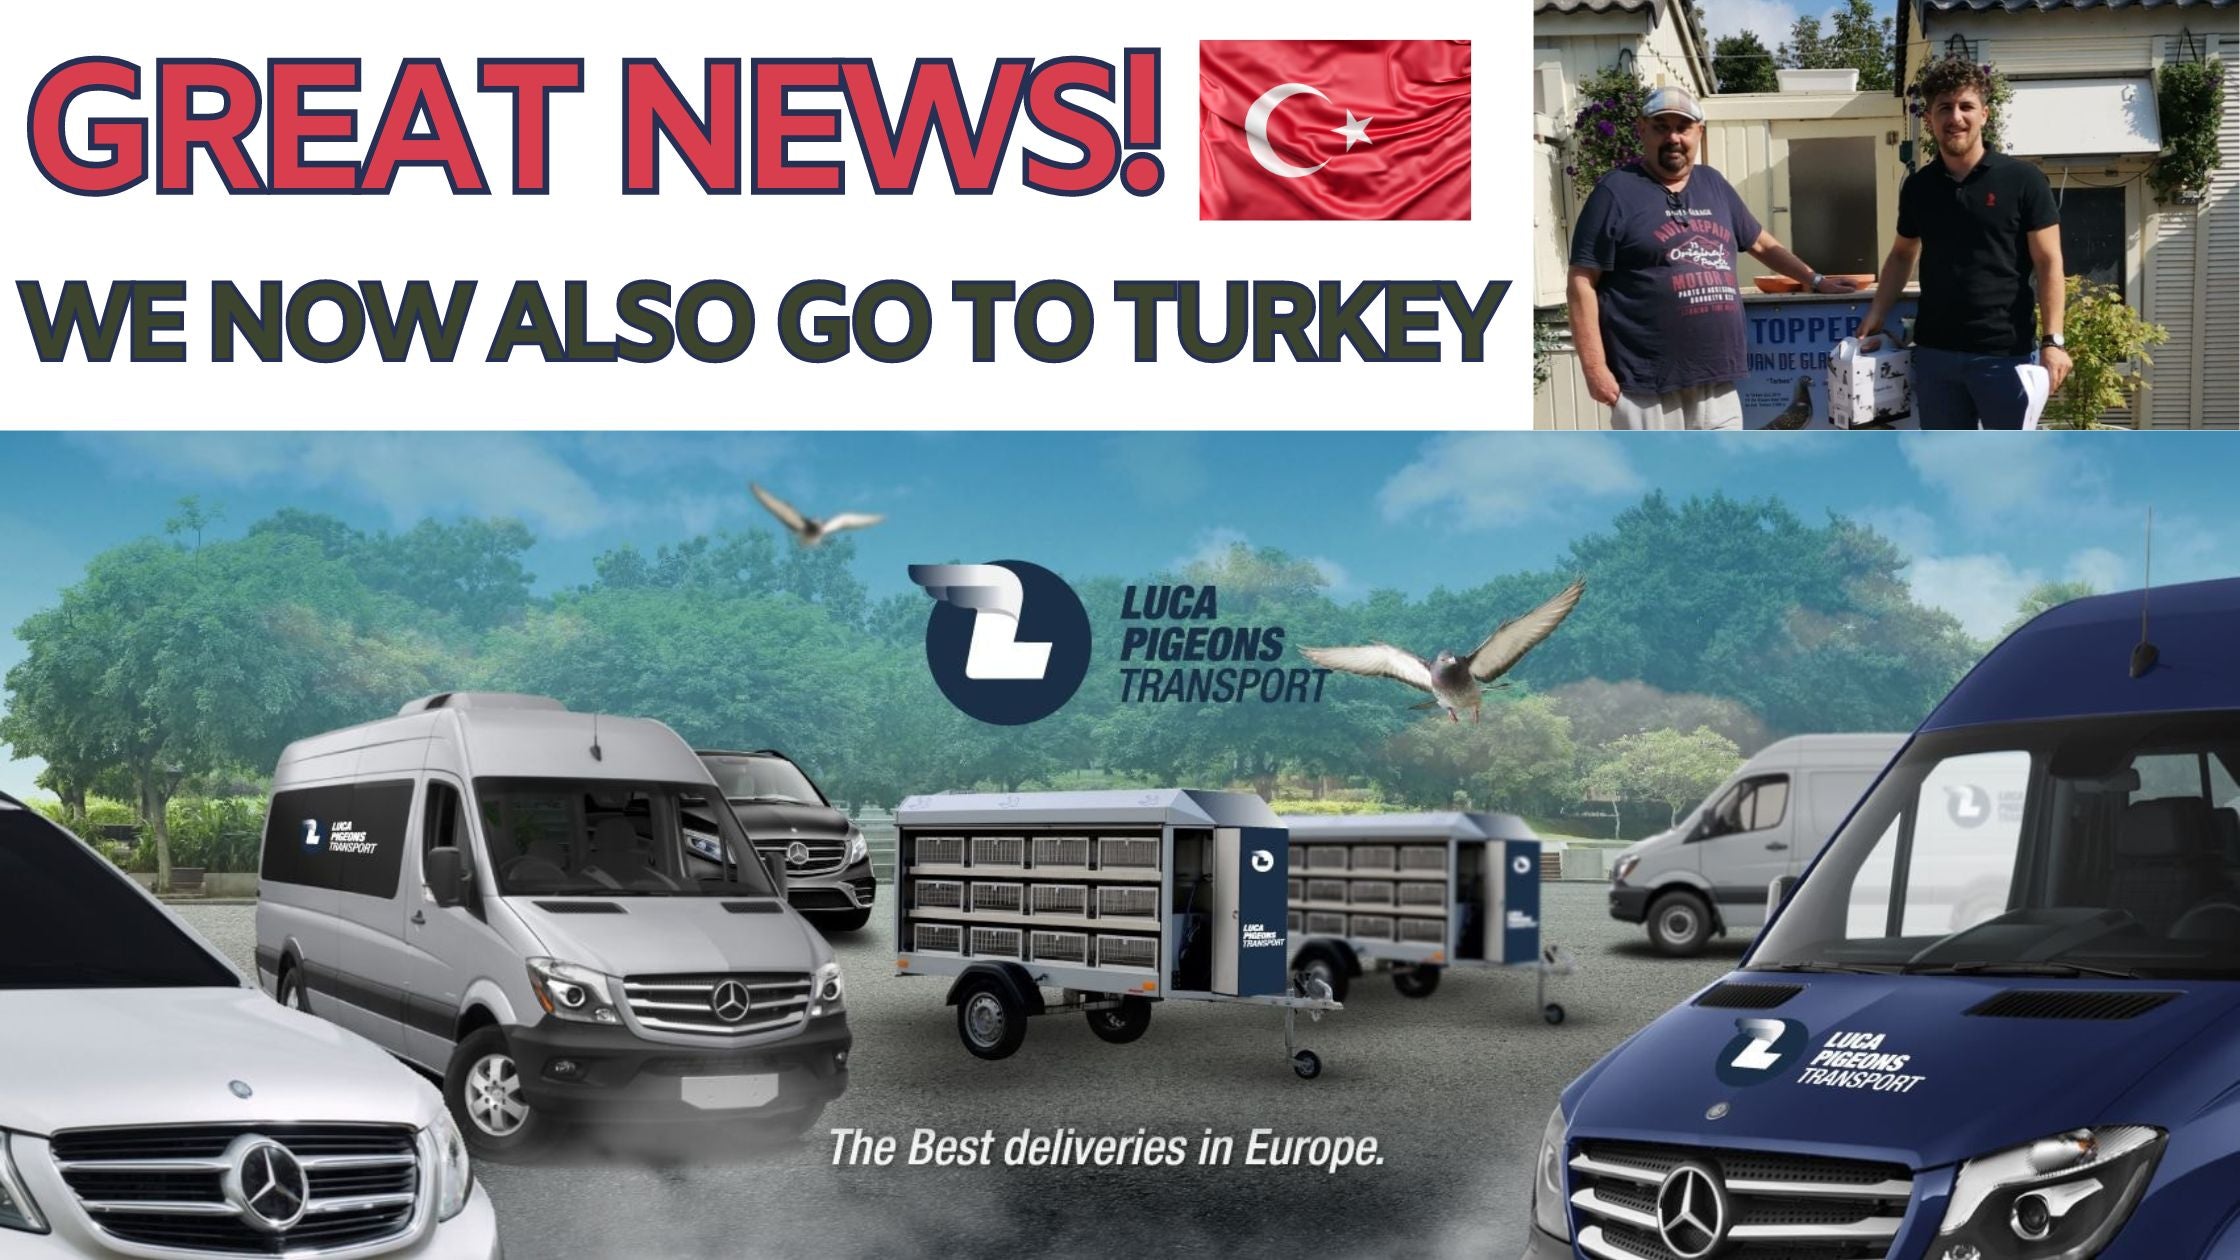 Luca Pigeon Transport: Our Premier Choice for Safe and Swift Racing Pigeon Delivery to Turkey